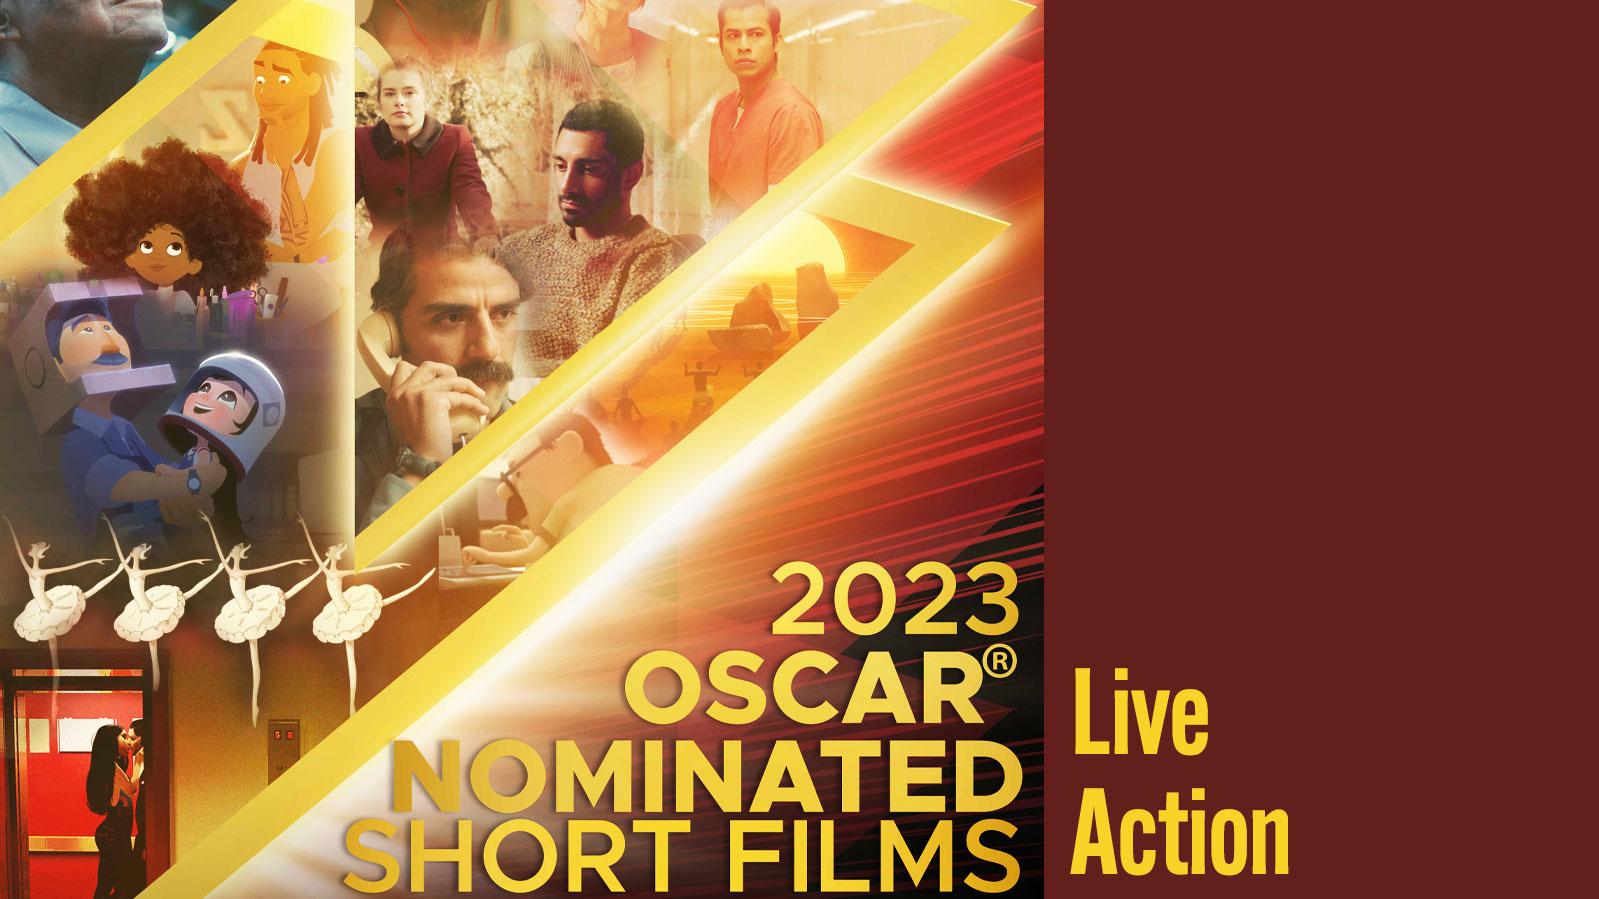 Poster with text "2023 Oscar Nominated Shorts Live Action"